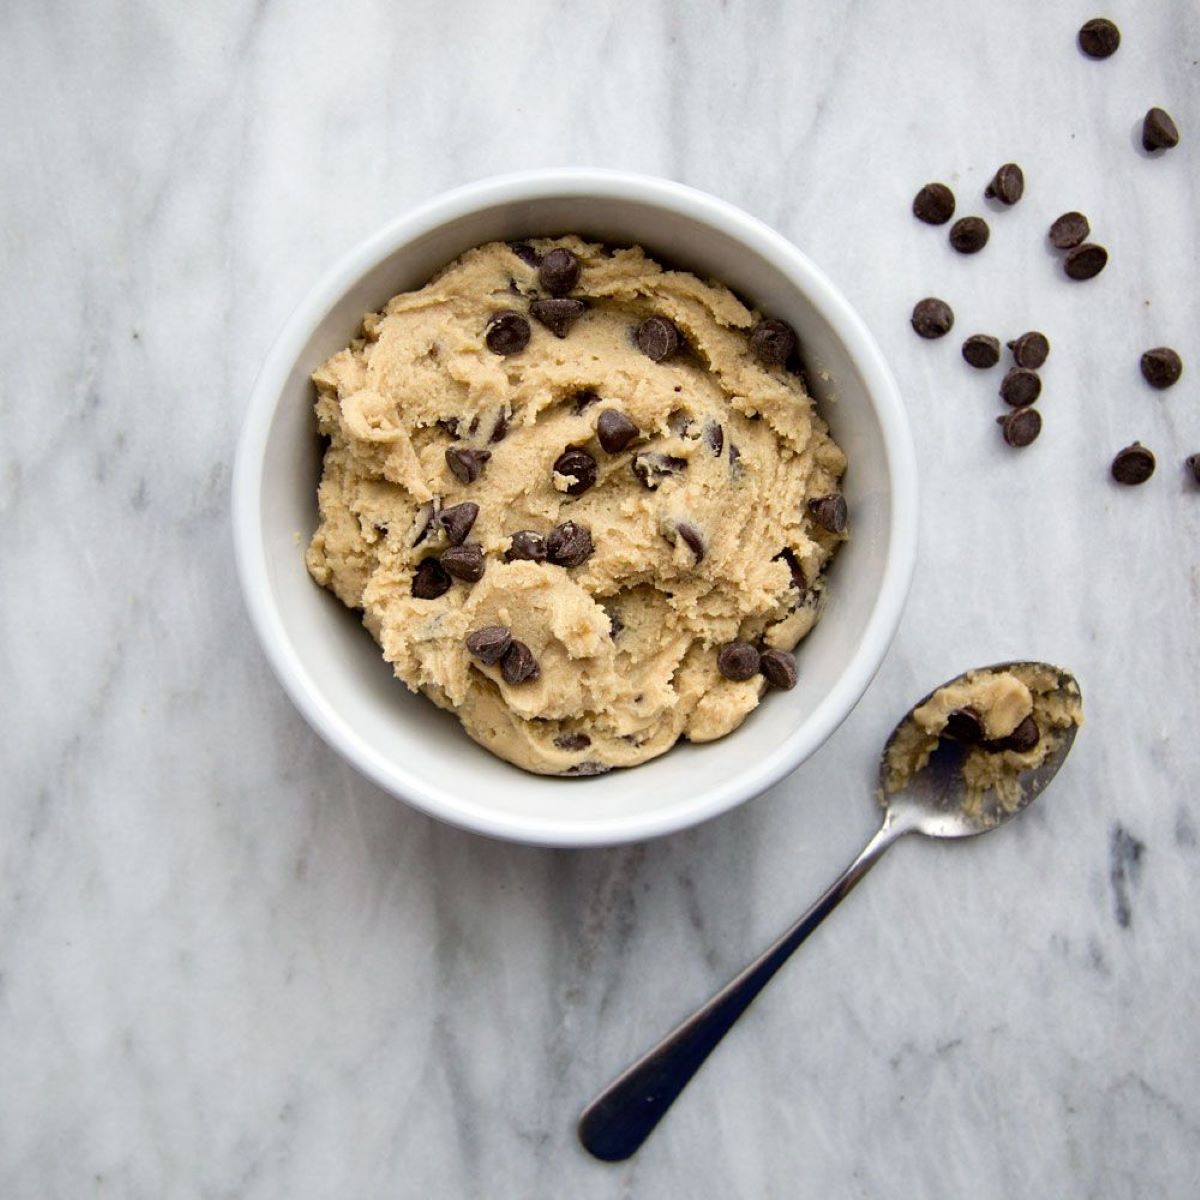 How To Store Edible Cookie Dough